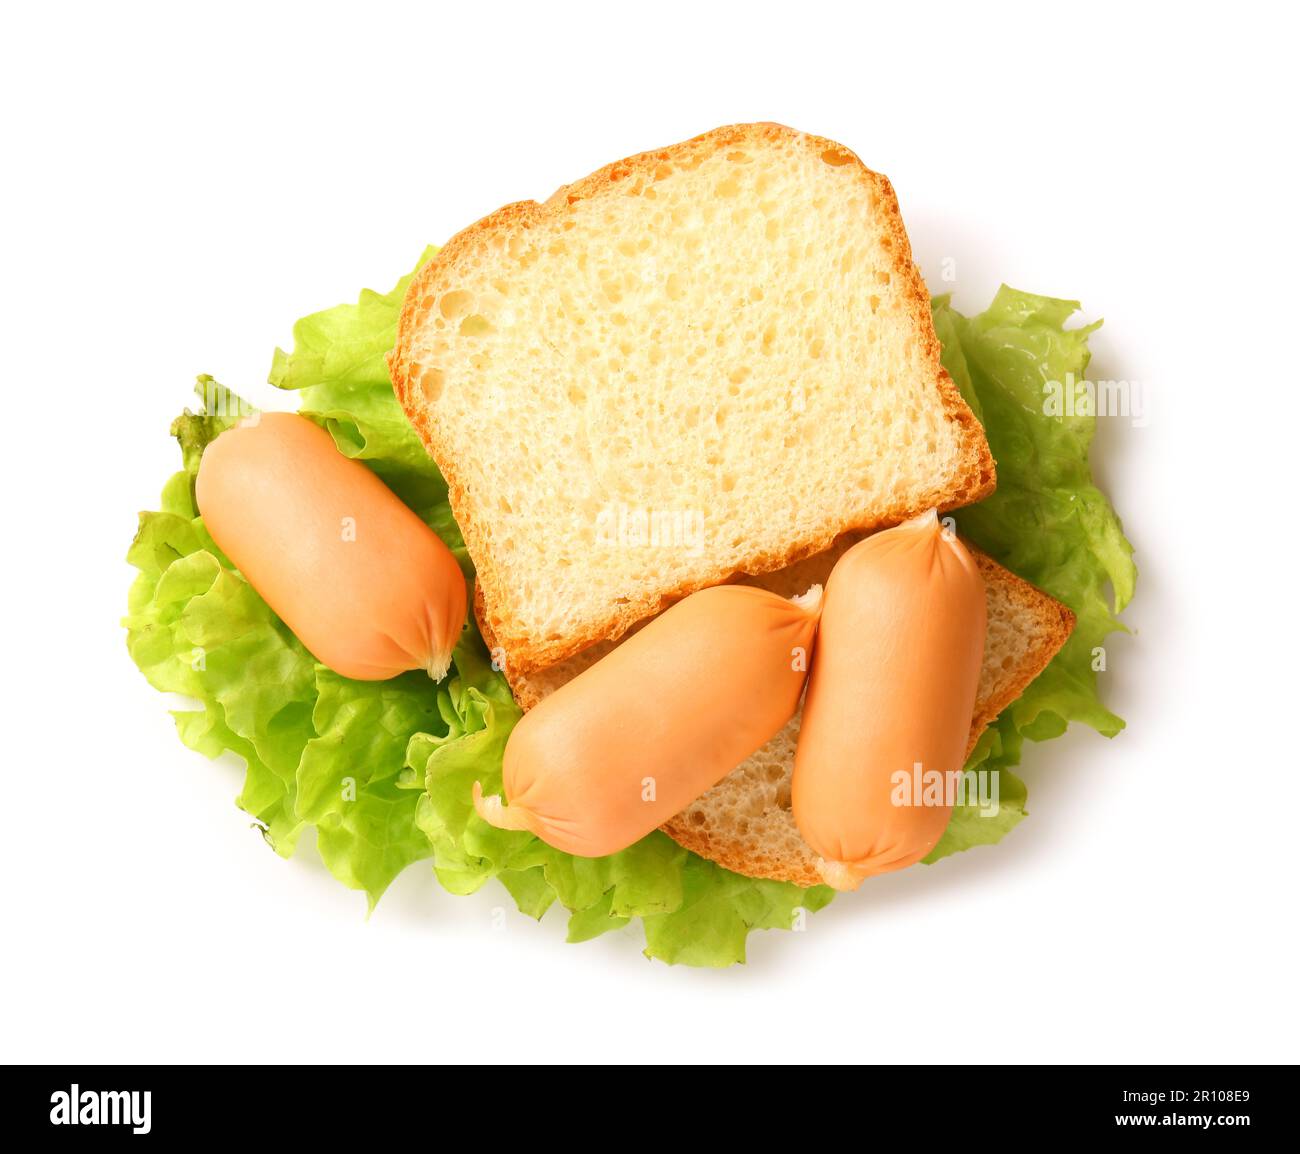 Tasty boiled sausages with lettuce and bread on white background Stock Photo